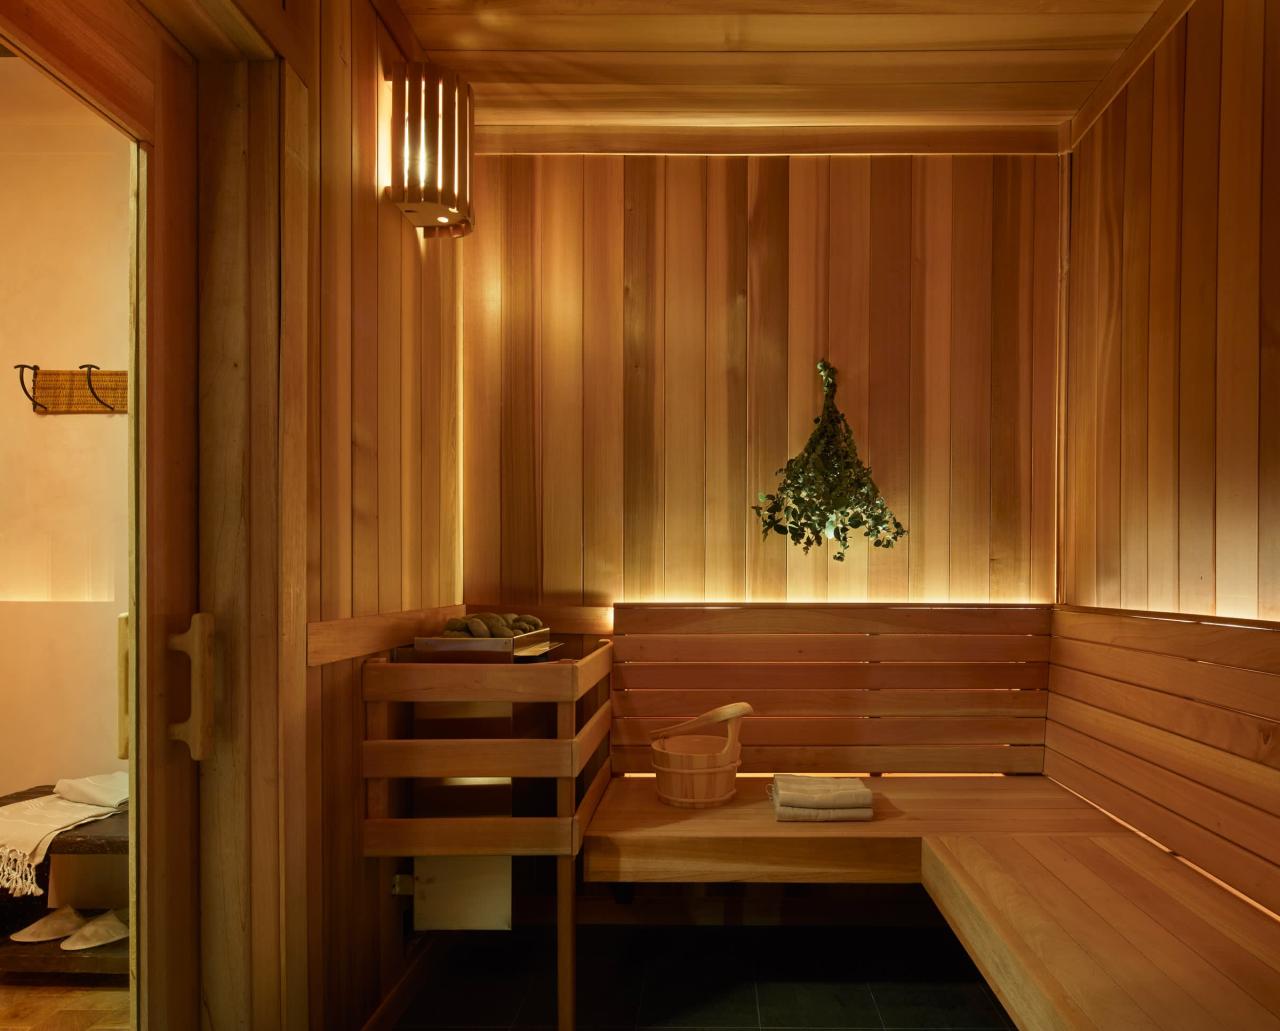 The sauna at Hotel Chelsea, New York